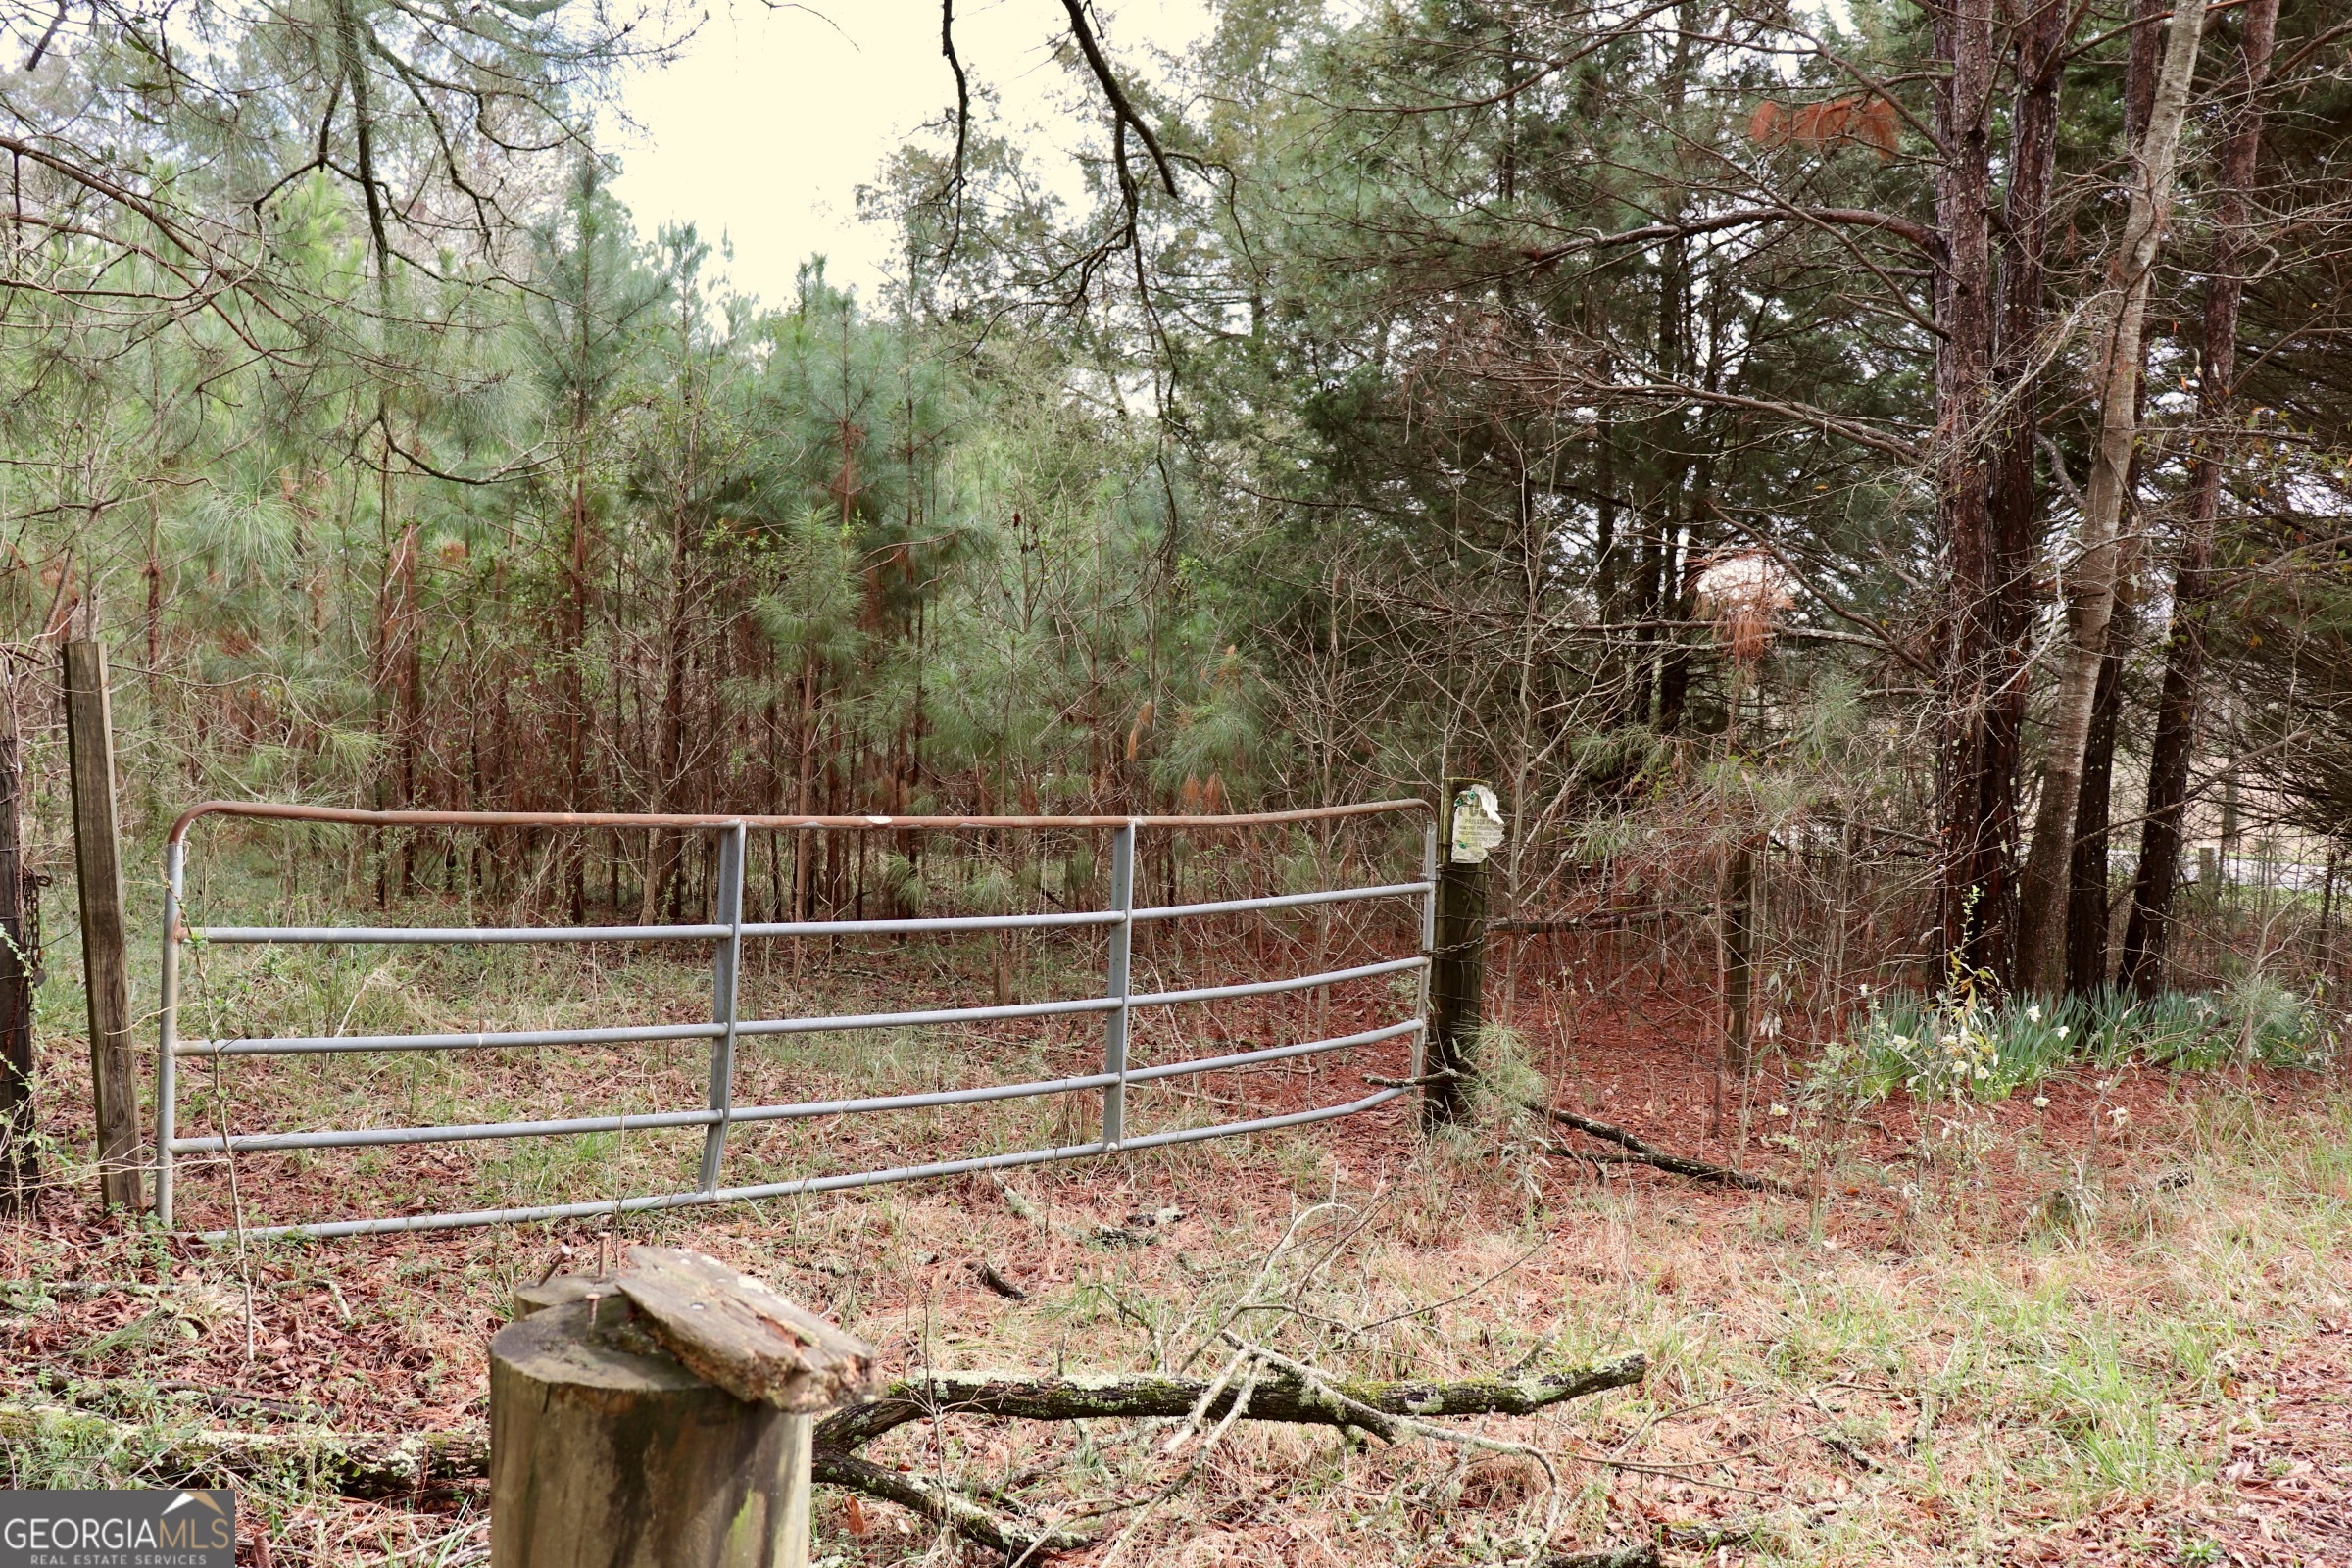 a view of a wooden fence and trees